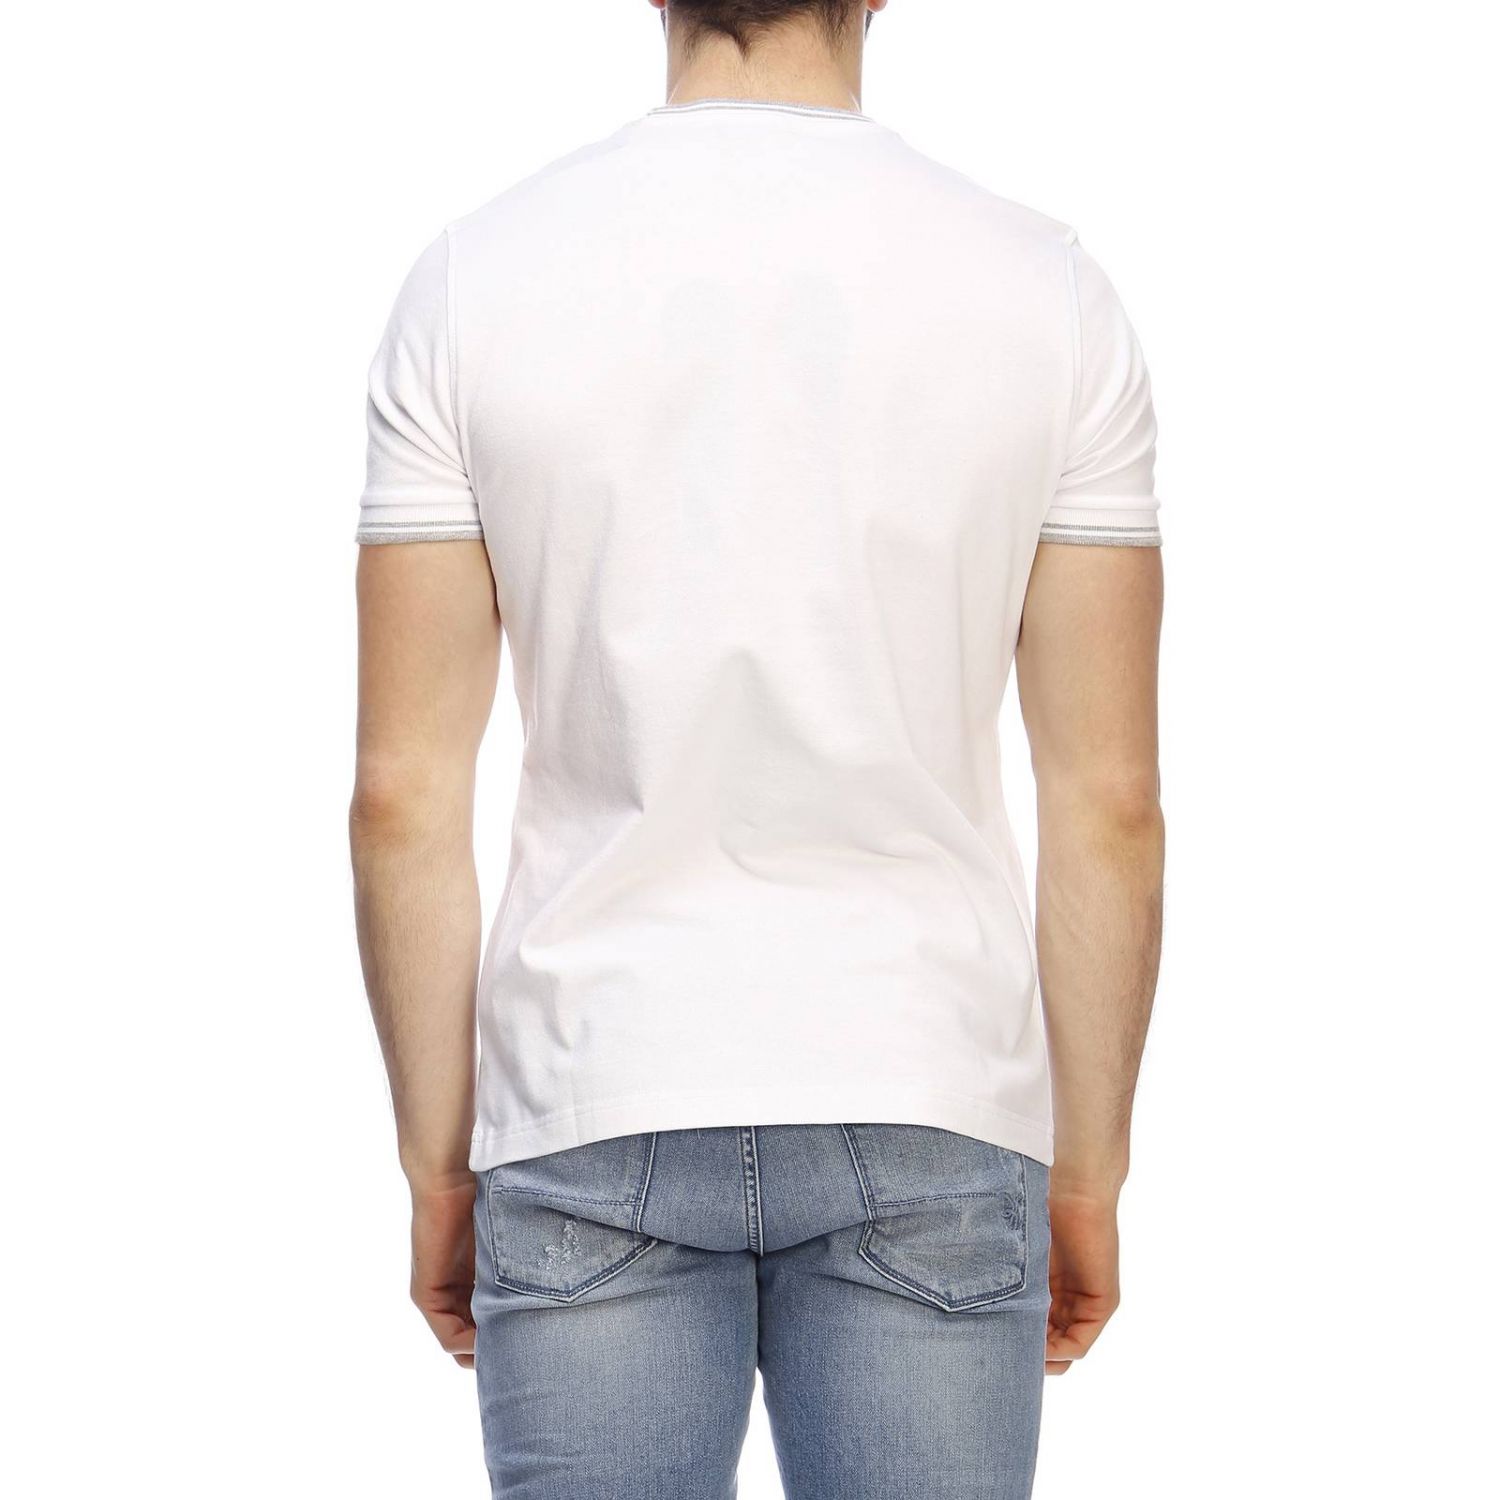 Fay Outlet: T-shirt men - White | T-Shirt Fay NPMB338135S IT0 GIGLIO.COM